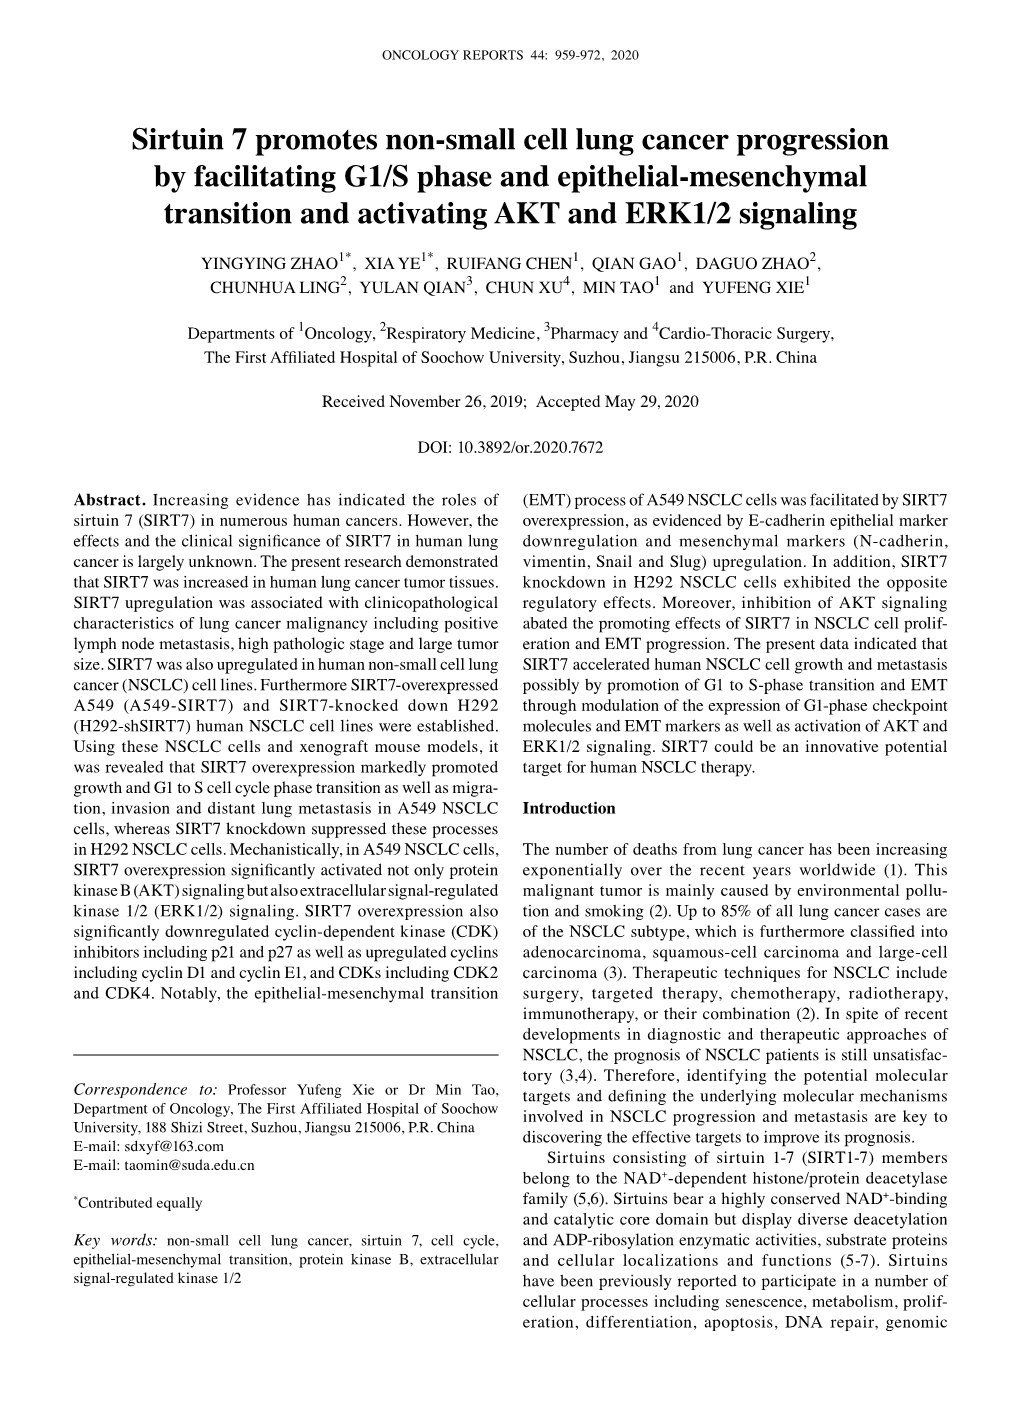 Sirtuin 7 Promotes Non‑Small Cell Lung Cancer Progression by Facilitating G1/S Phase and Epithelial‑Mesenchymal Transition and Activating AKT and ERK1/2 Signaling